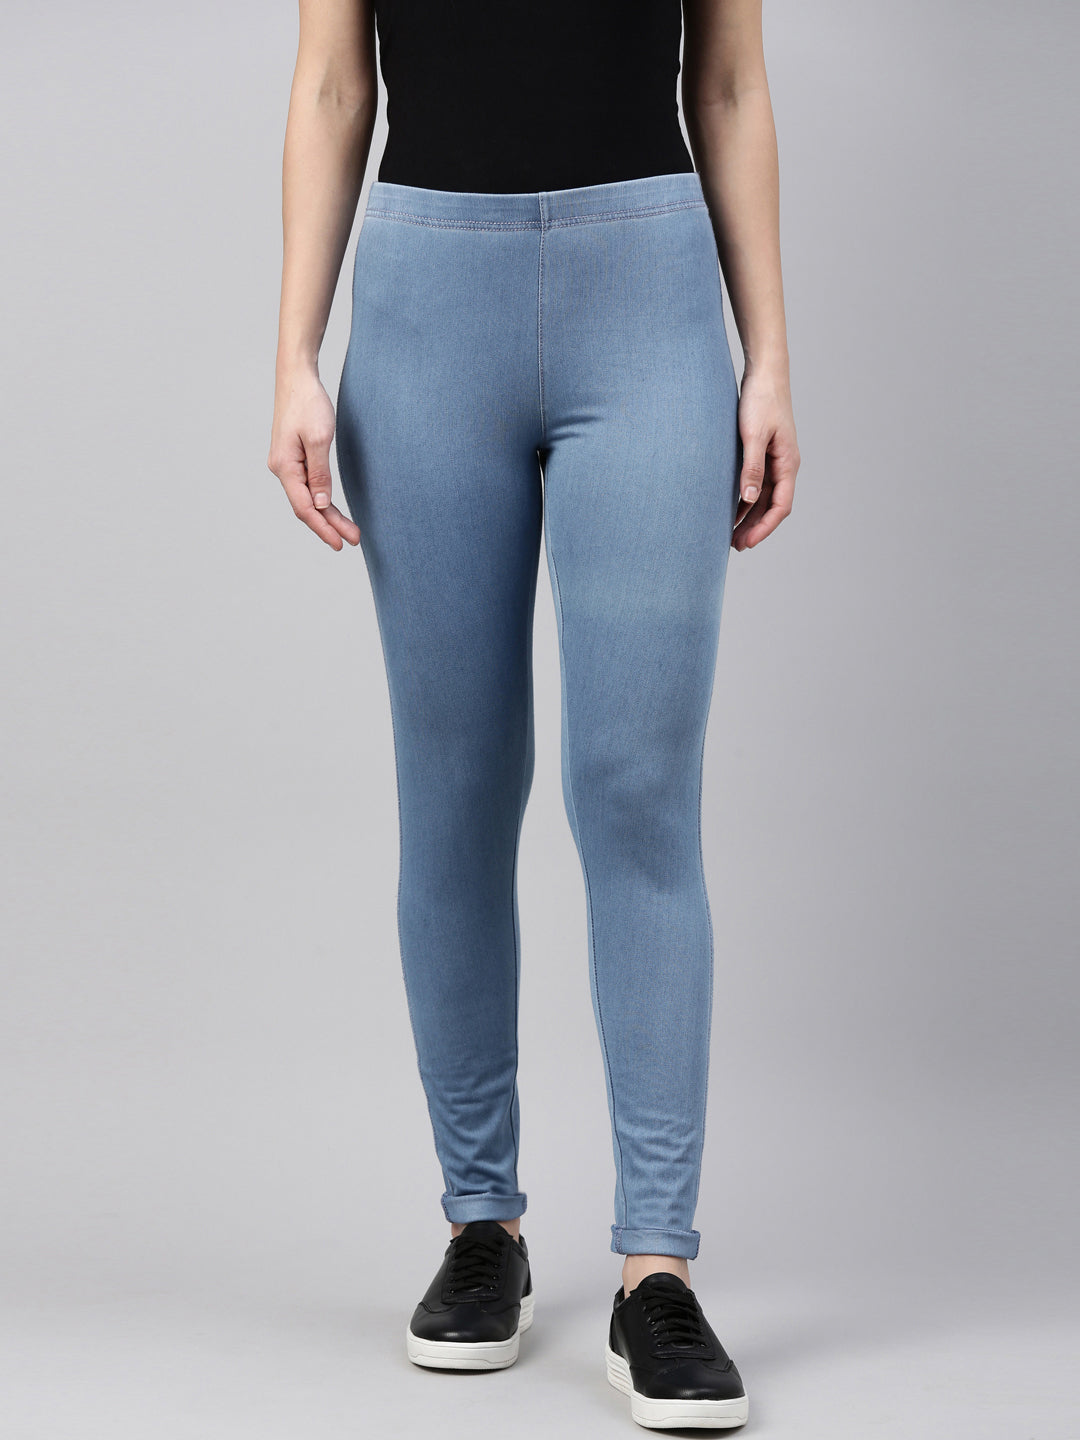 High-Waisted Seamless Colorblock Legging  Color block leggings, Legging,  Light blue leggings